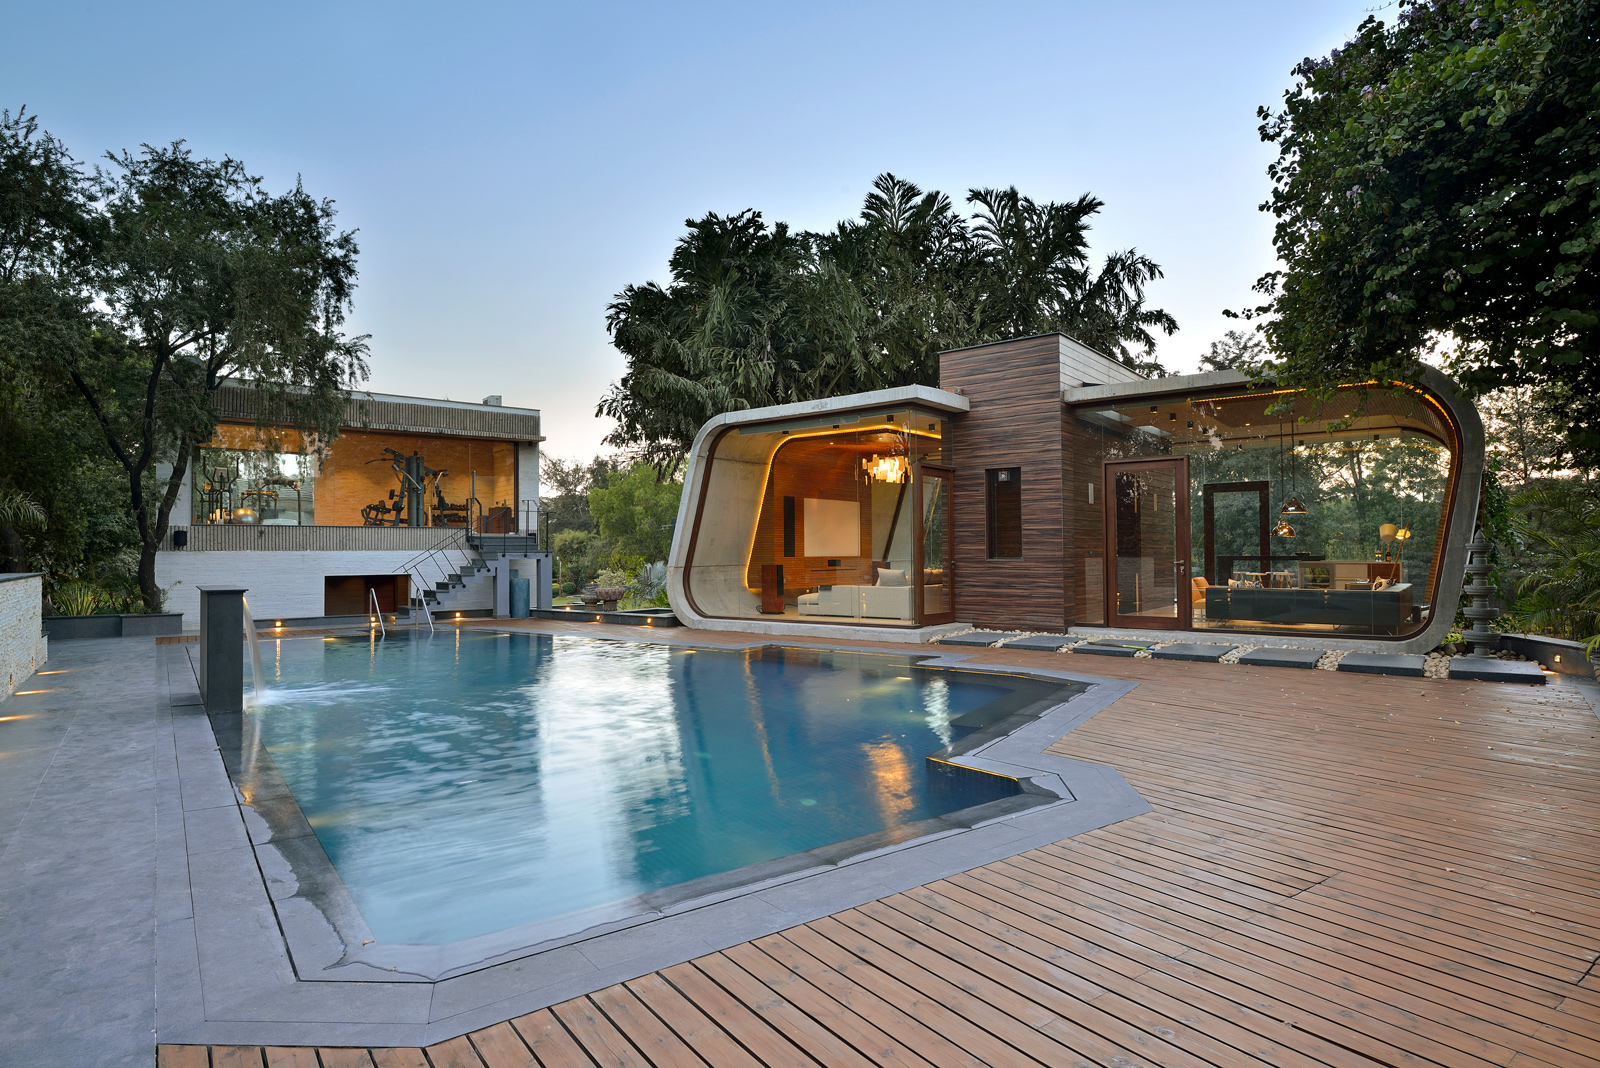 09_Pool-House-42MM-Architects-India